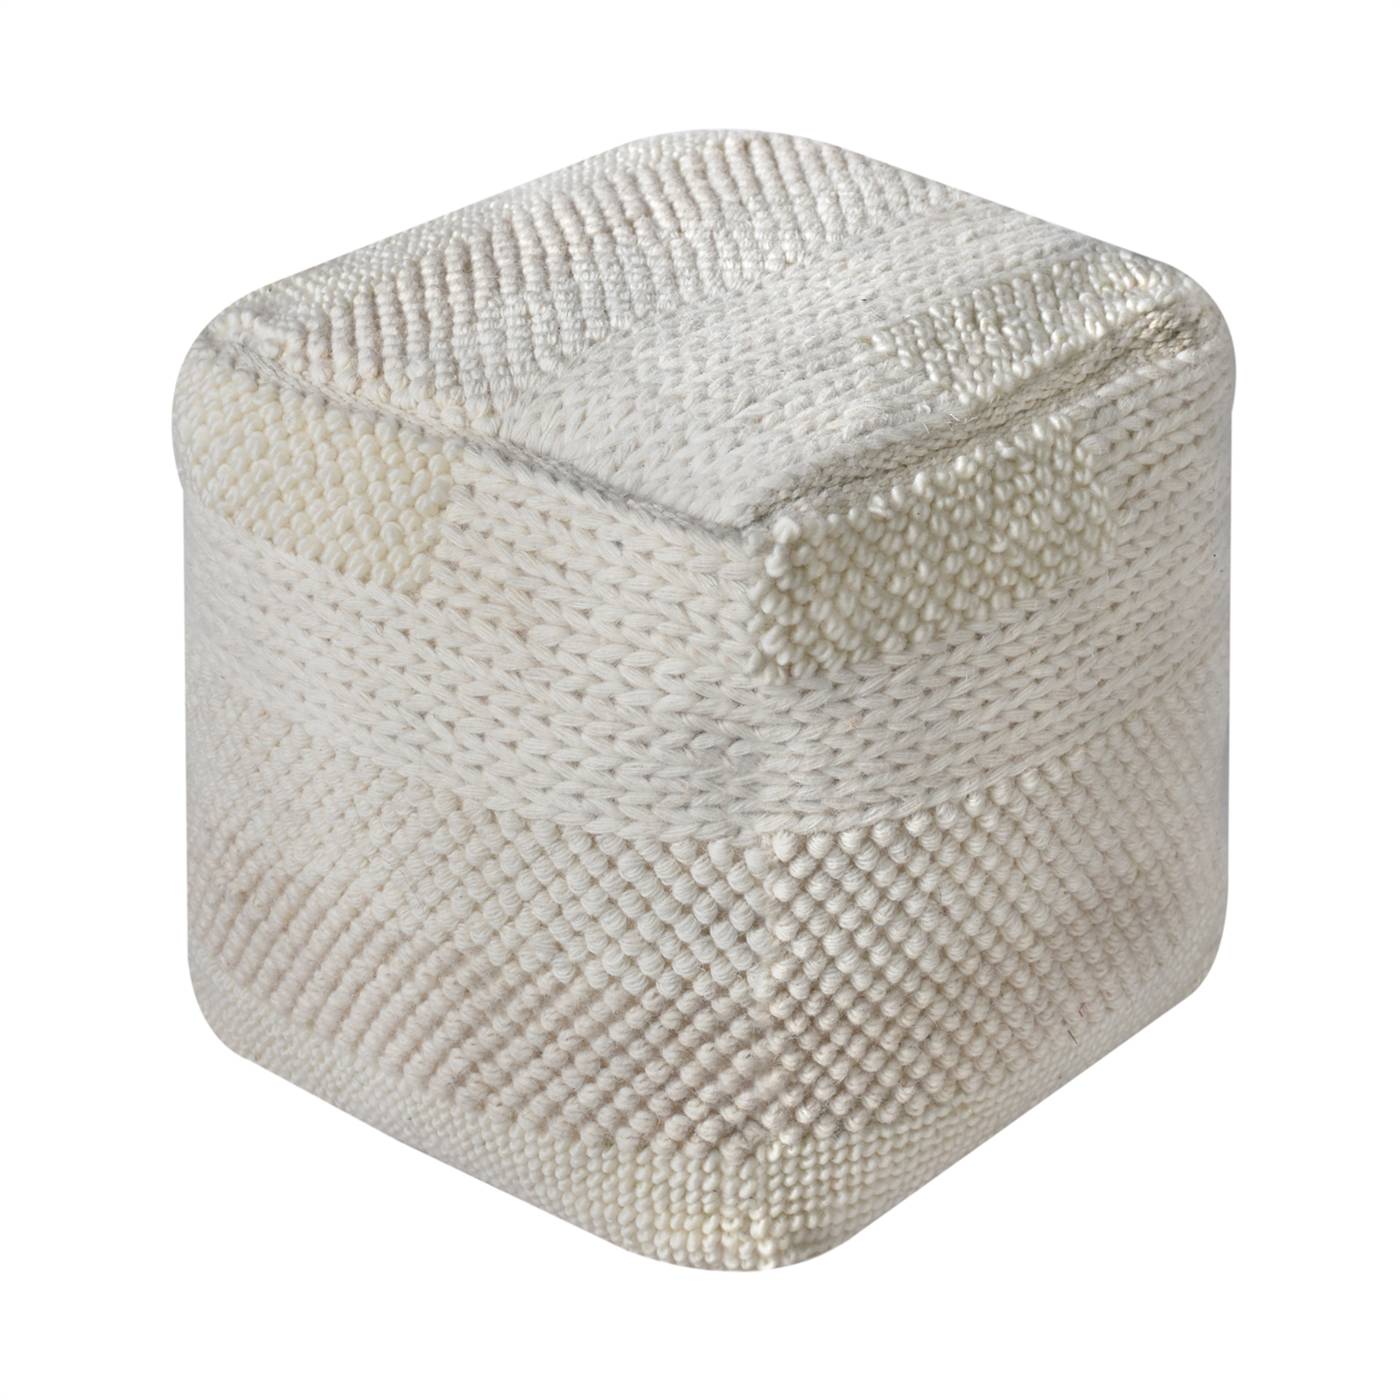 Cyrilla Pouf, 40x40x40 cm, Natural White, Wool, Hand Woven, Pitloom, All Loop